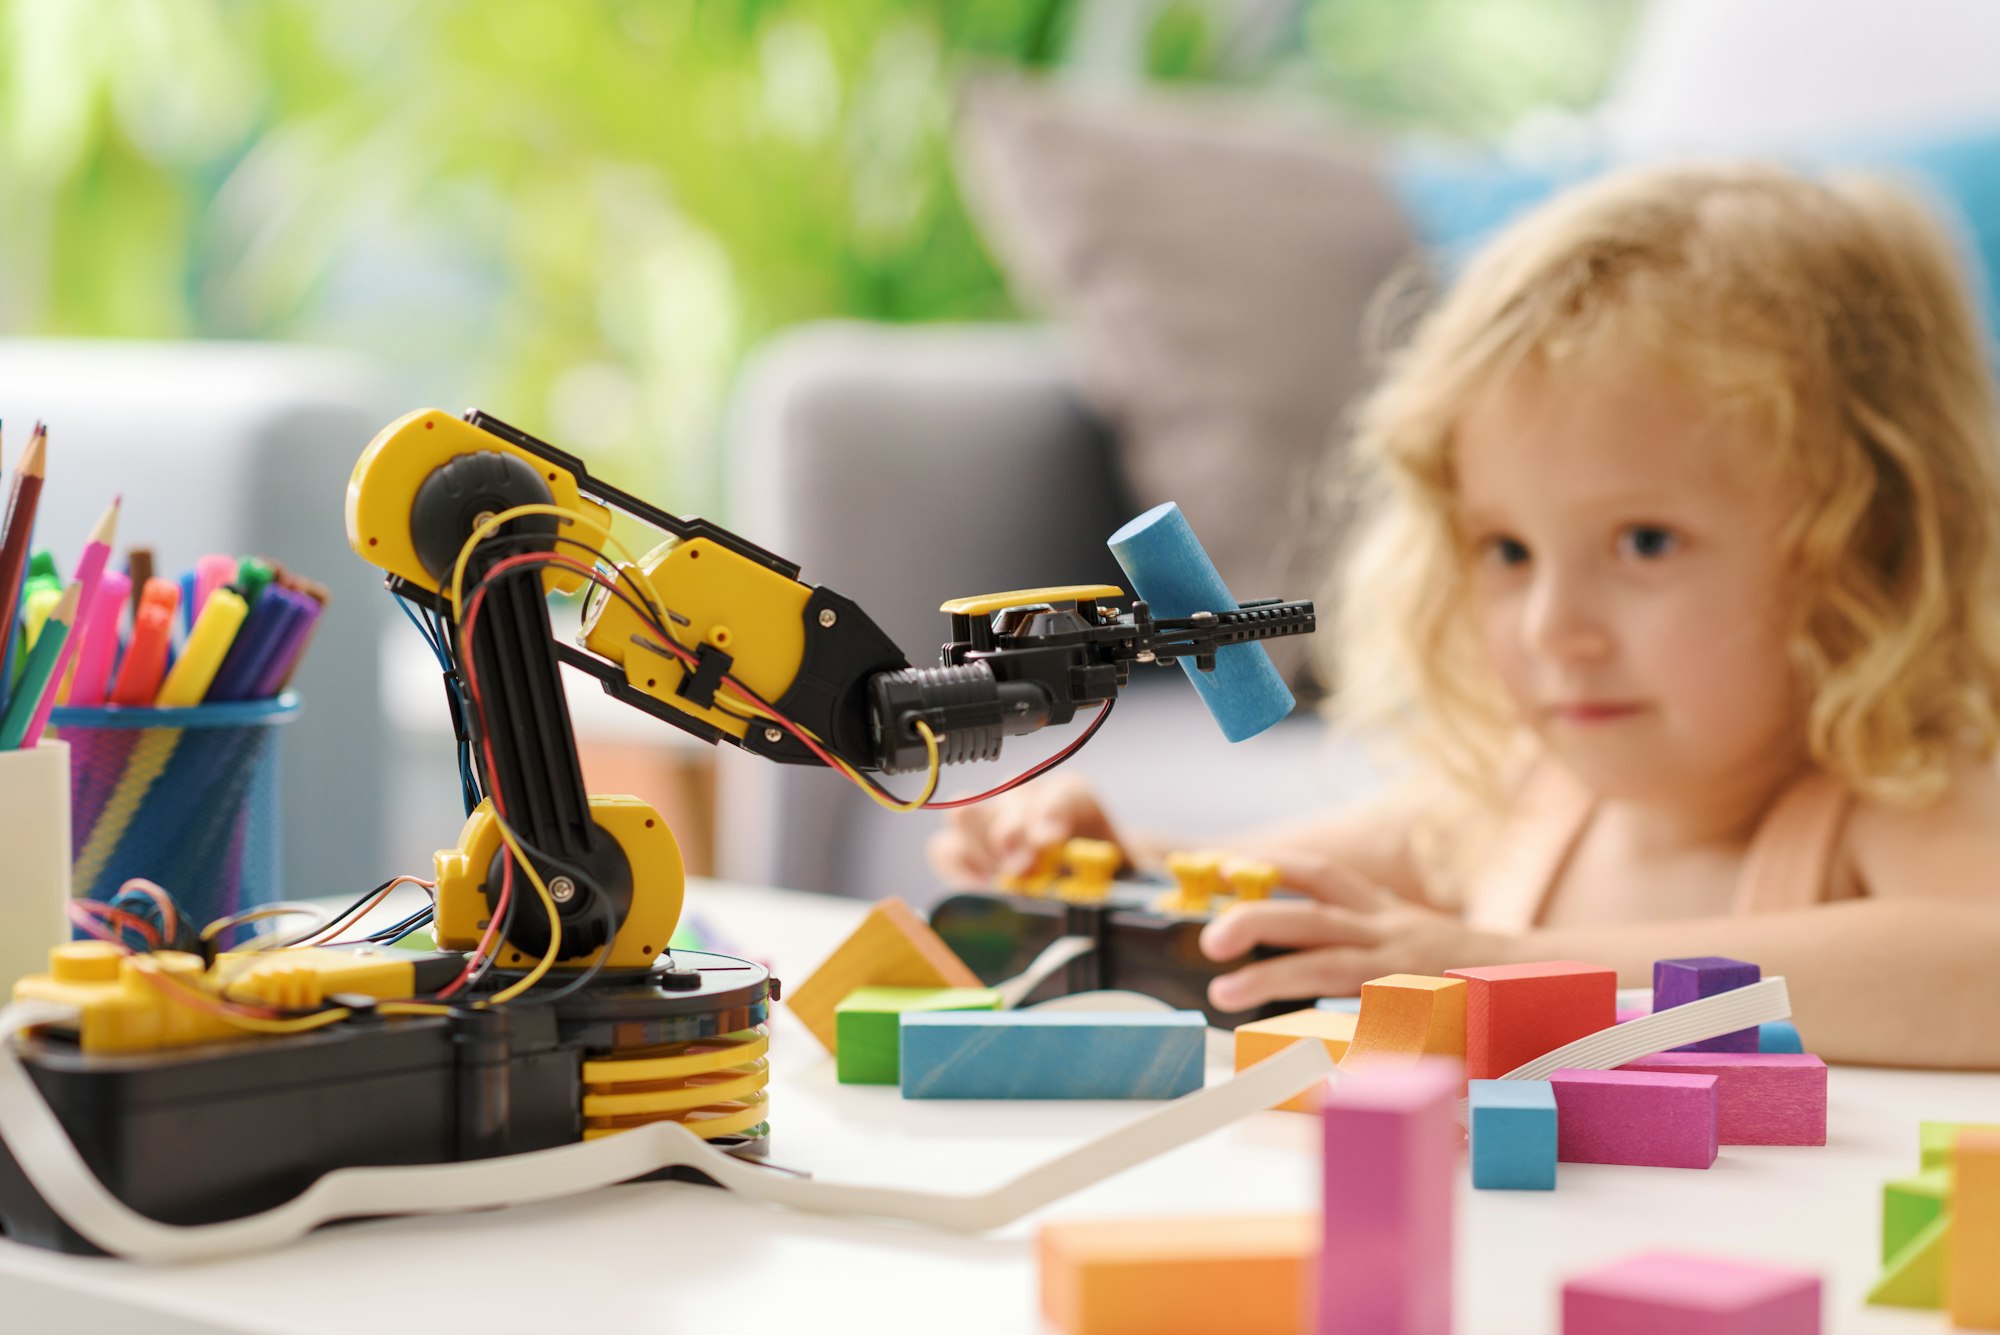 Child playing with a robotic arm toy